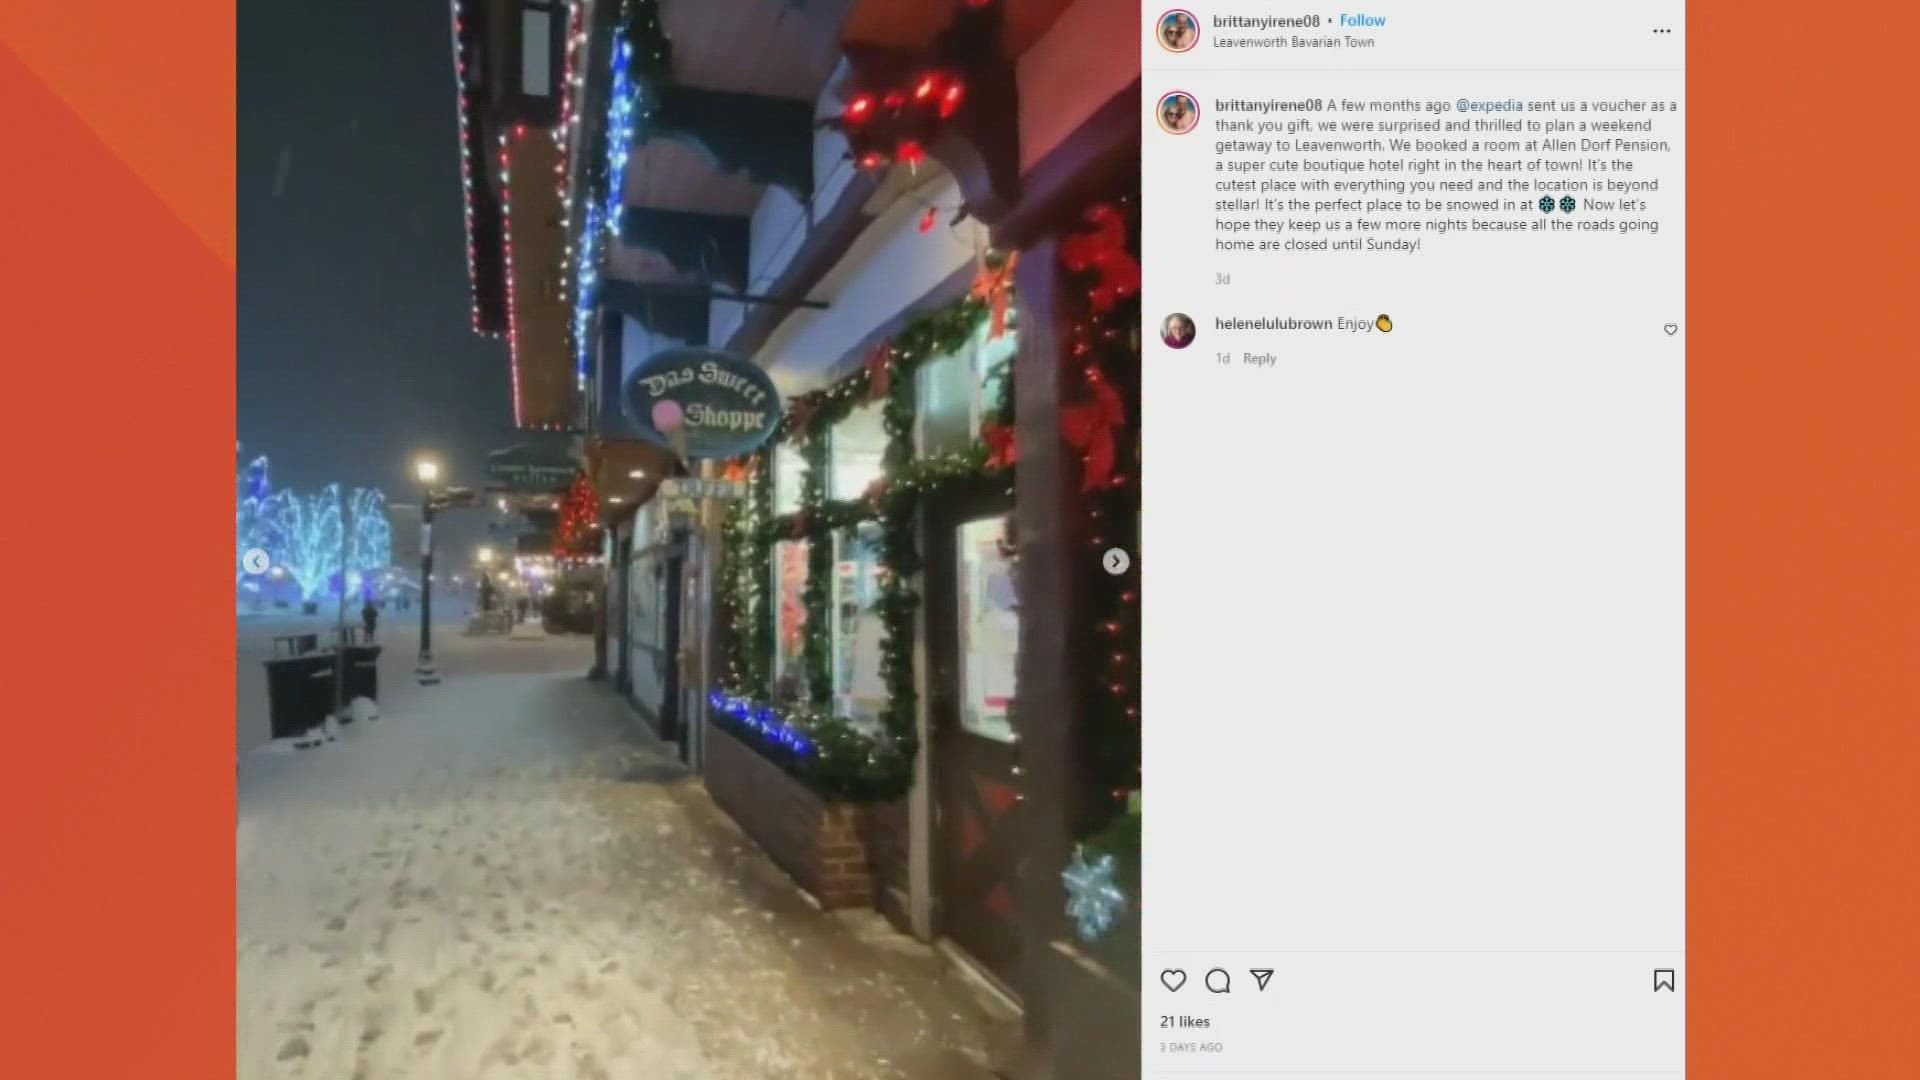 A Washington couple visiting Leavenworth filmed their experience getting snowed in during record snowfall and went viral on TikTok over the weekend.